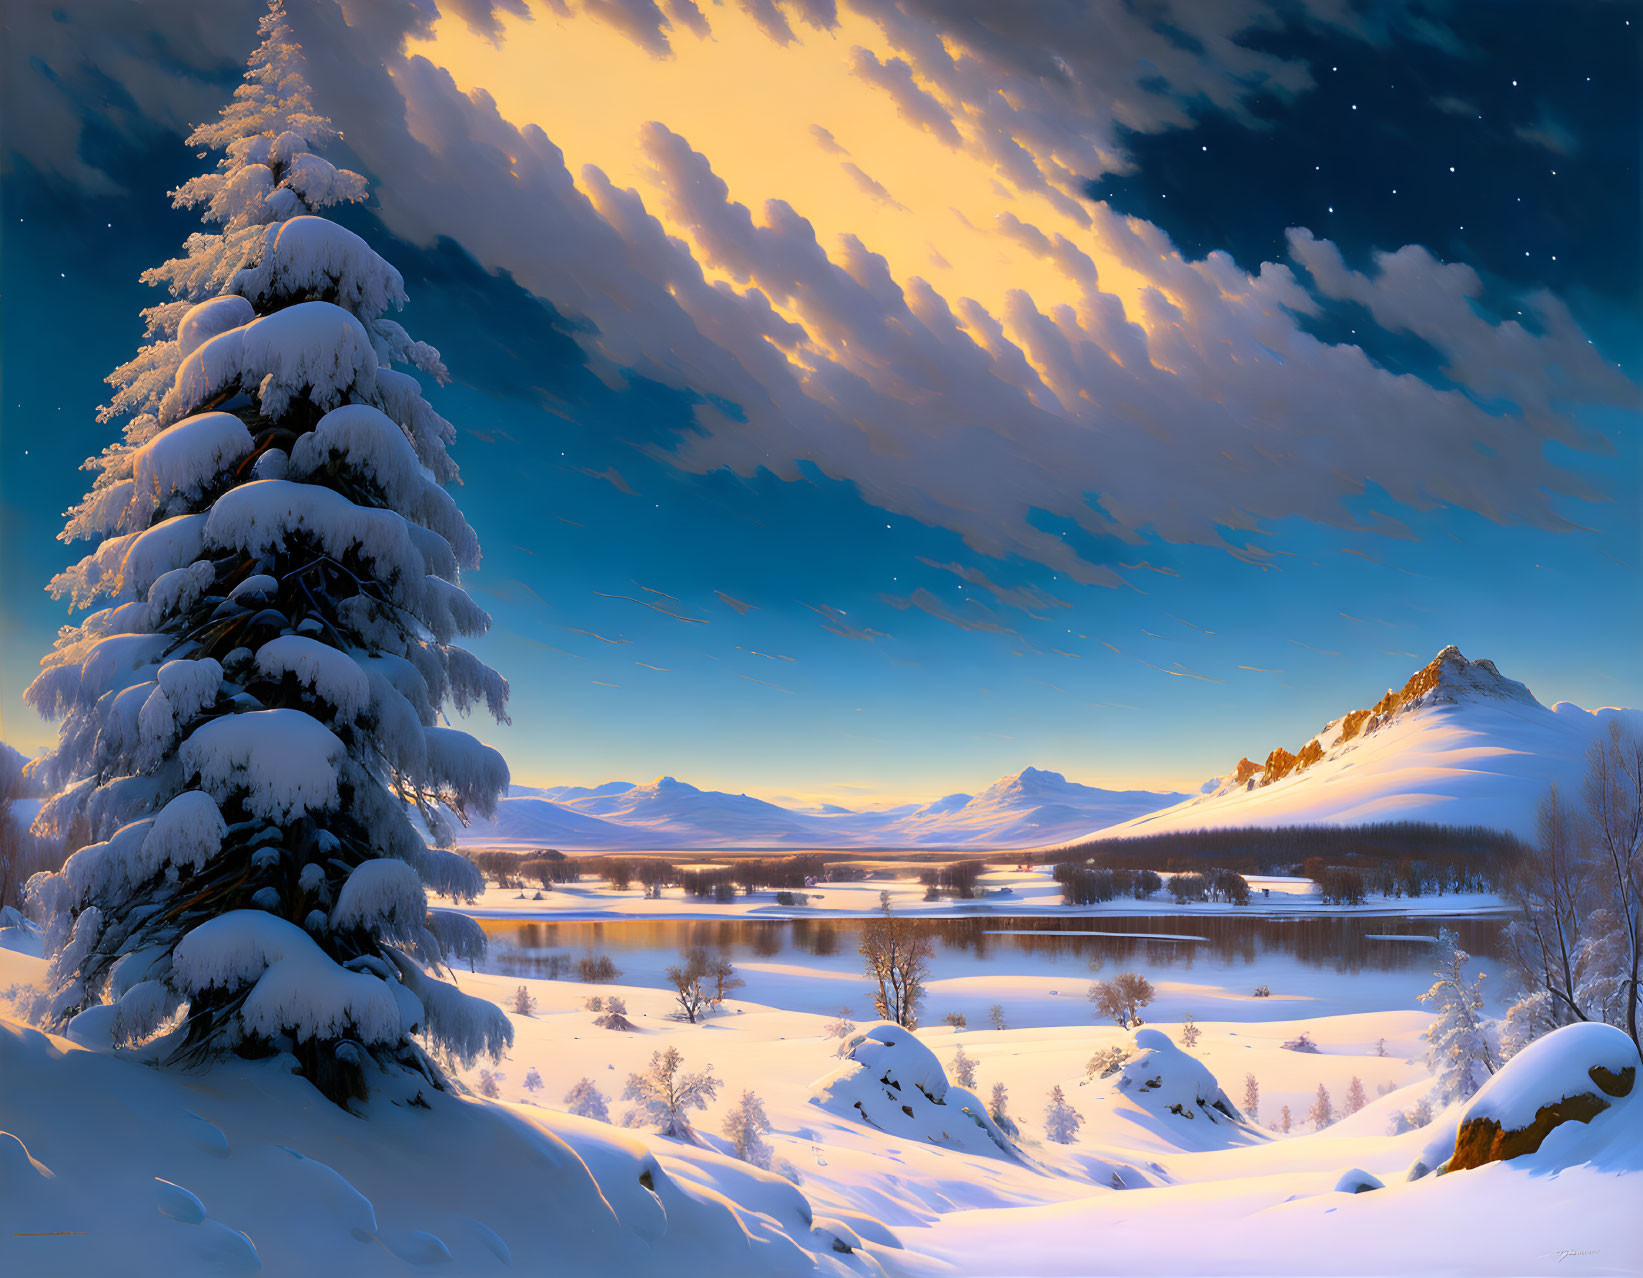 Snow-covered landscape at dusk with evergreen tree, clouds, and tranquil lake